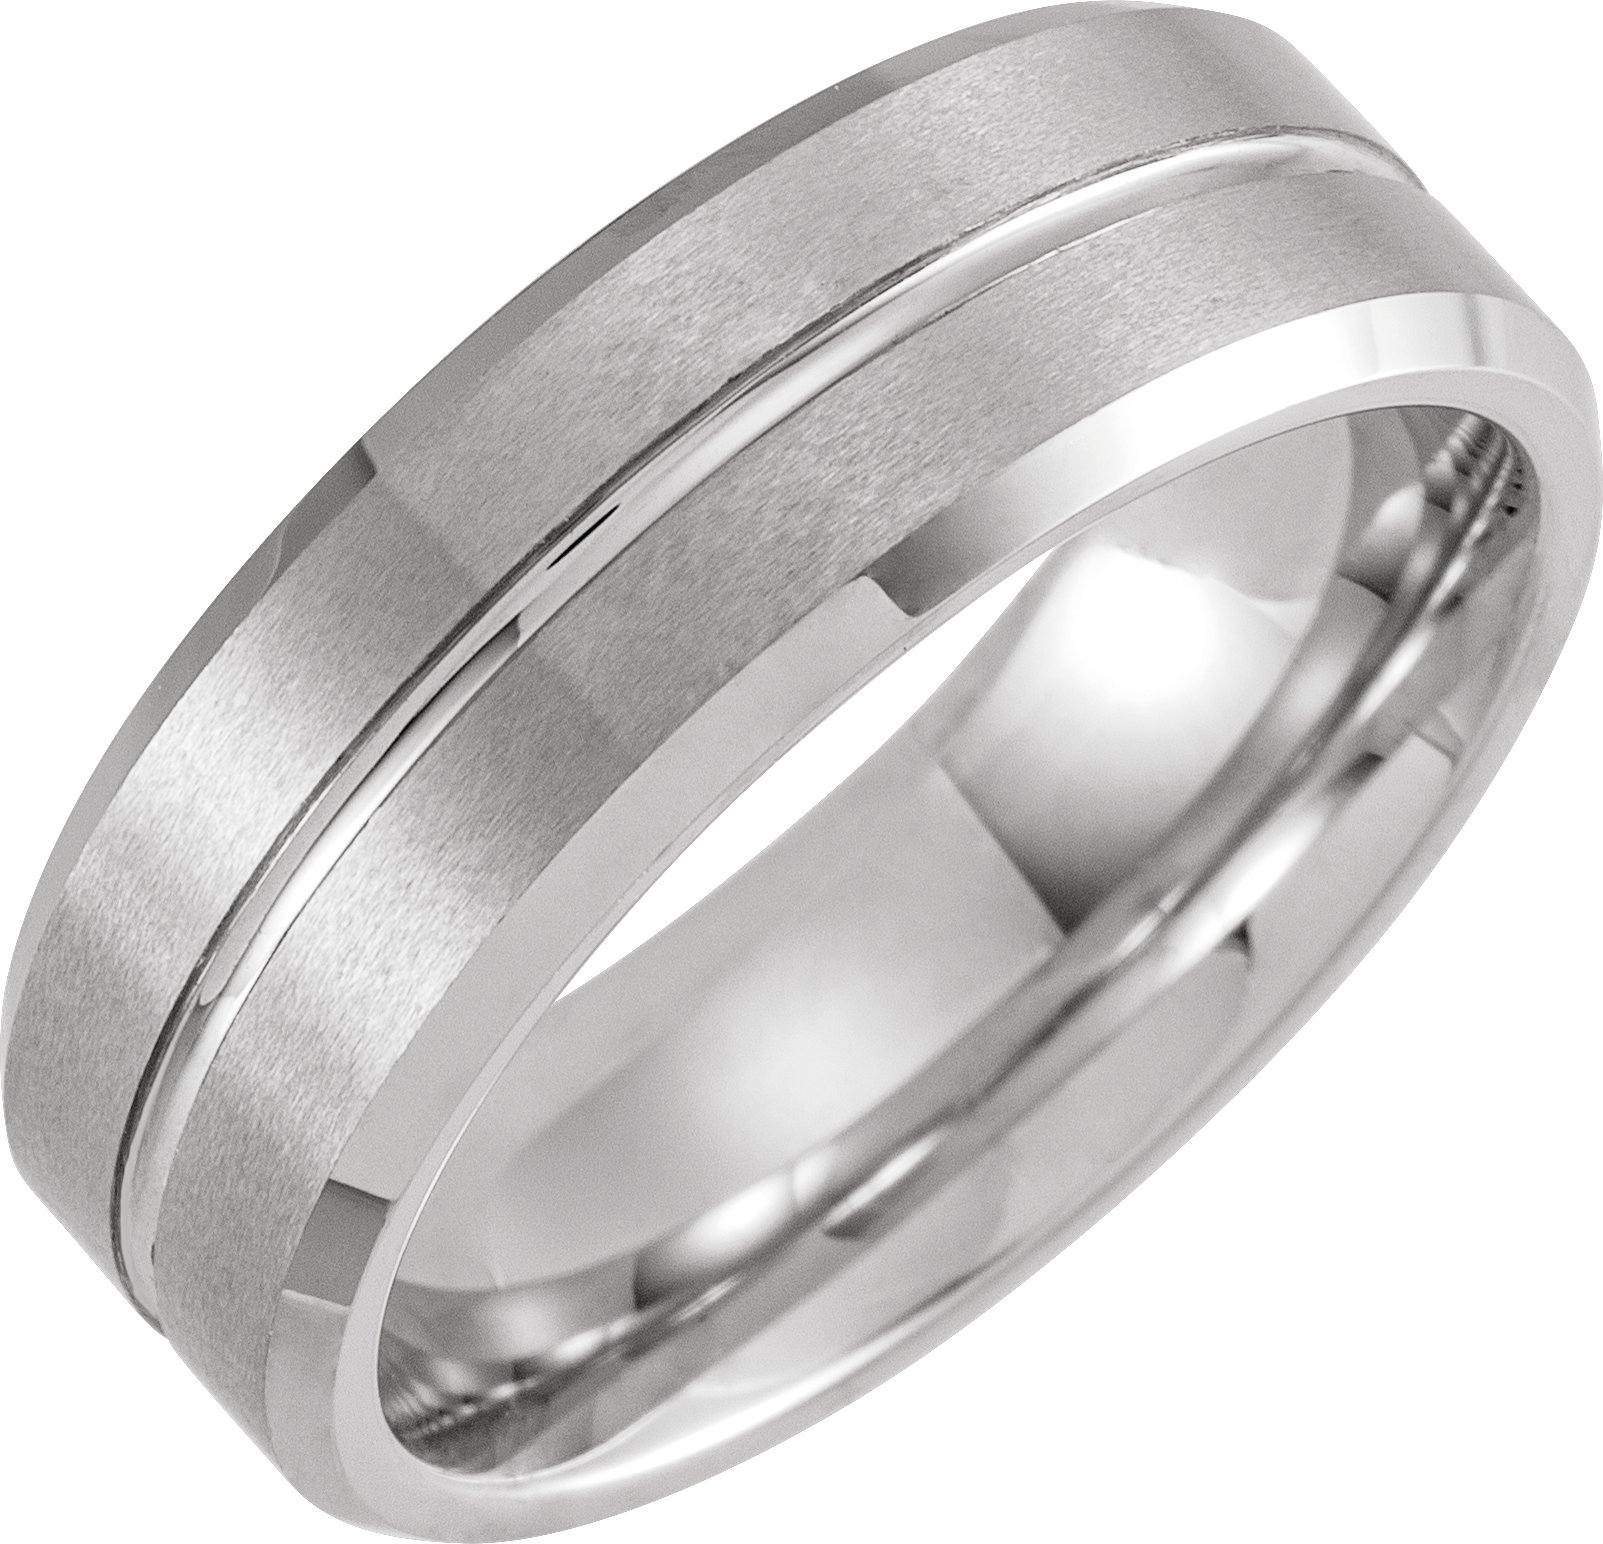 White PVD Tungsten 8 mm Beveled Grooved Matte Band Size 10 